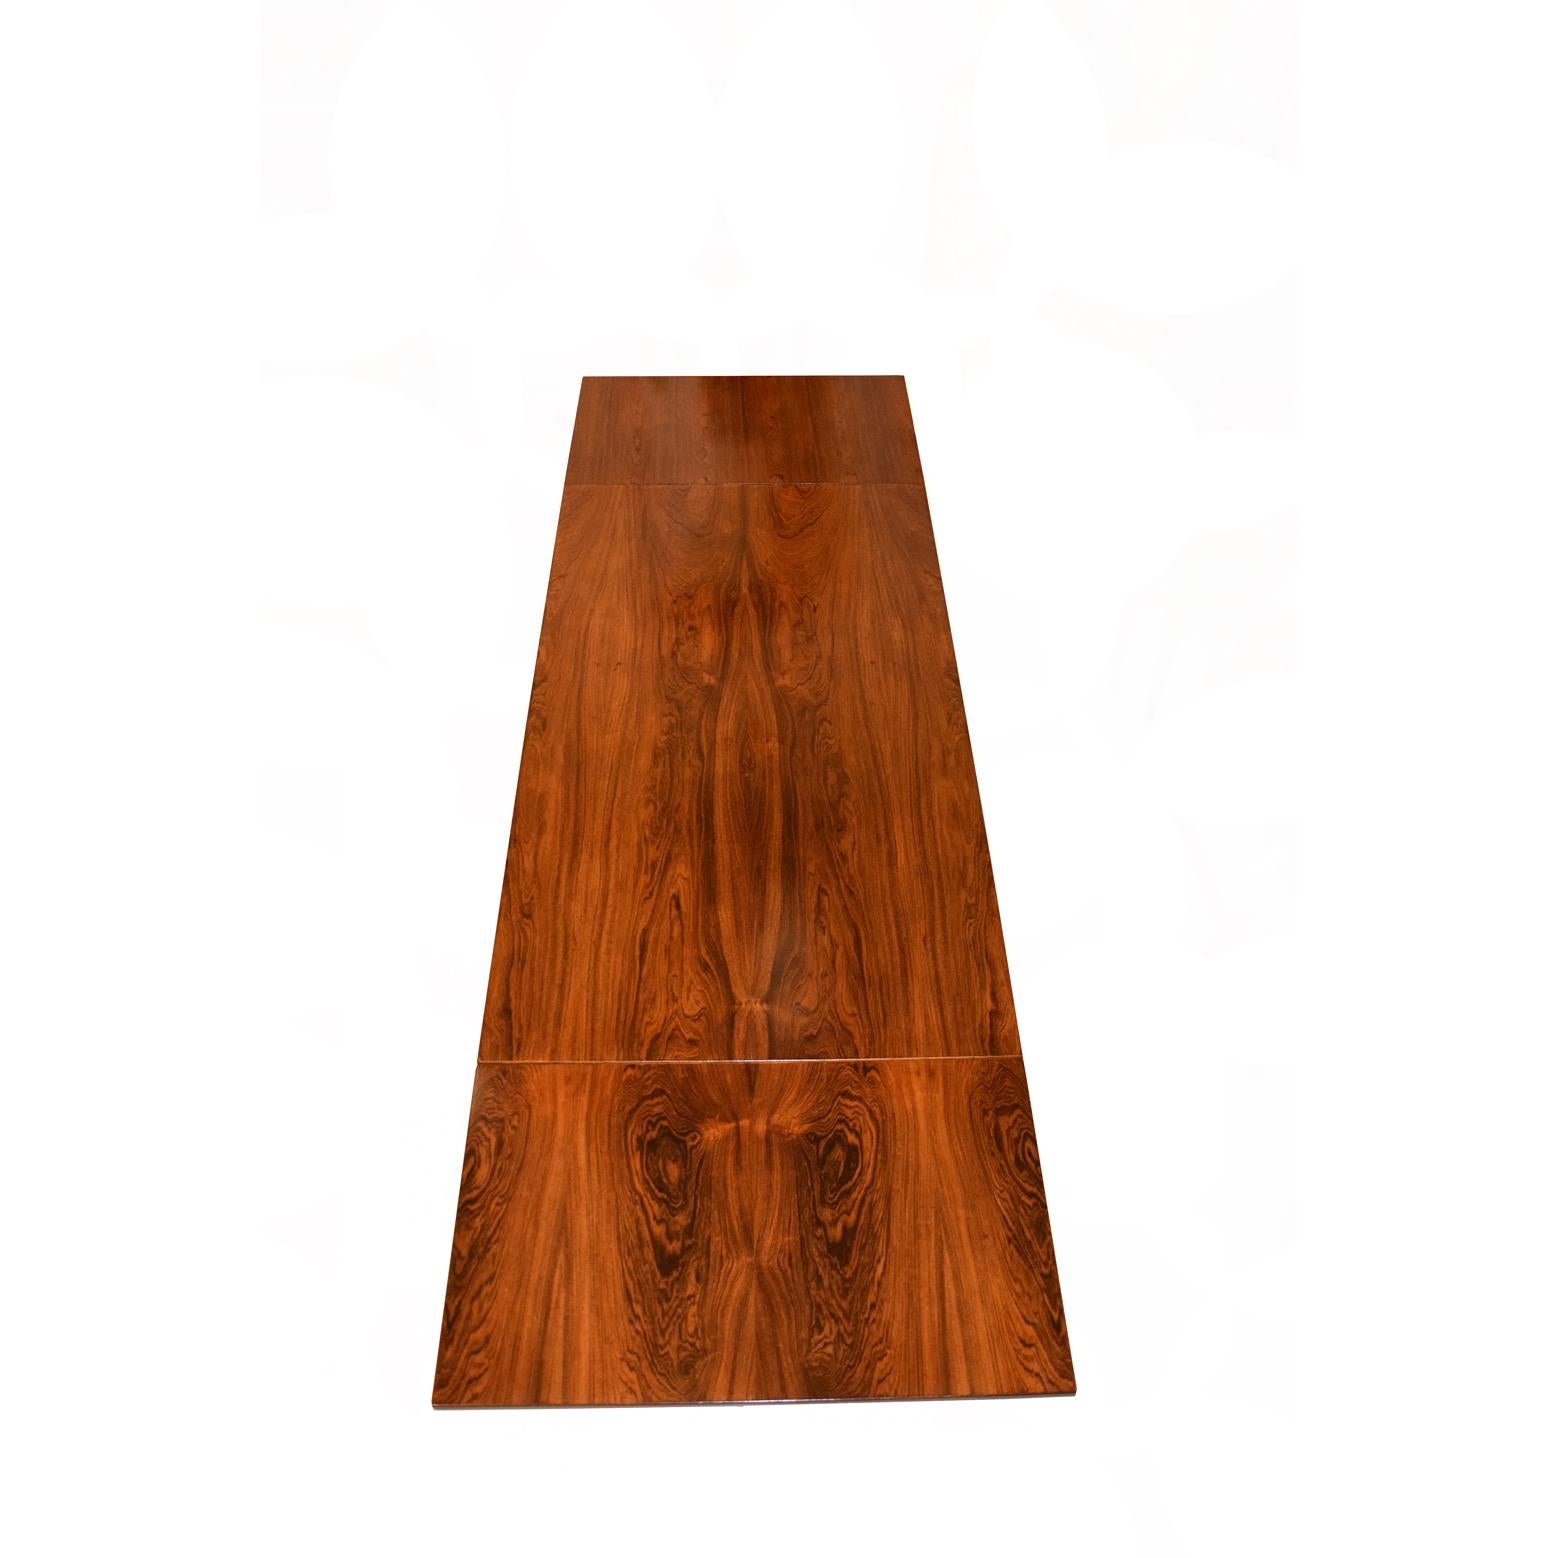 Rosewood dining table with removable drop leaves mede by Andreas Tuck can be used as working table fully extends to 120.5